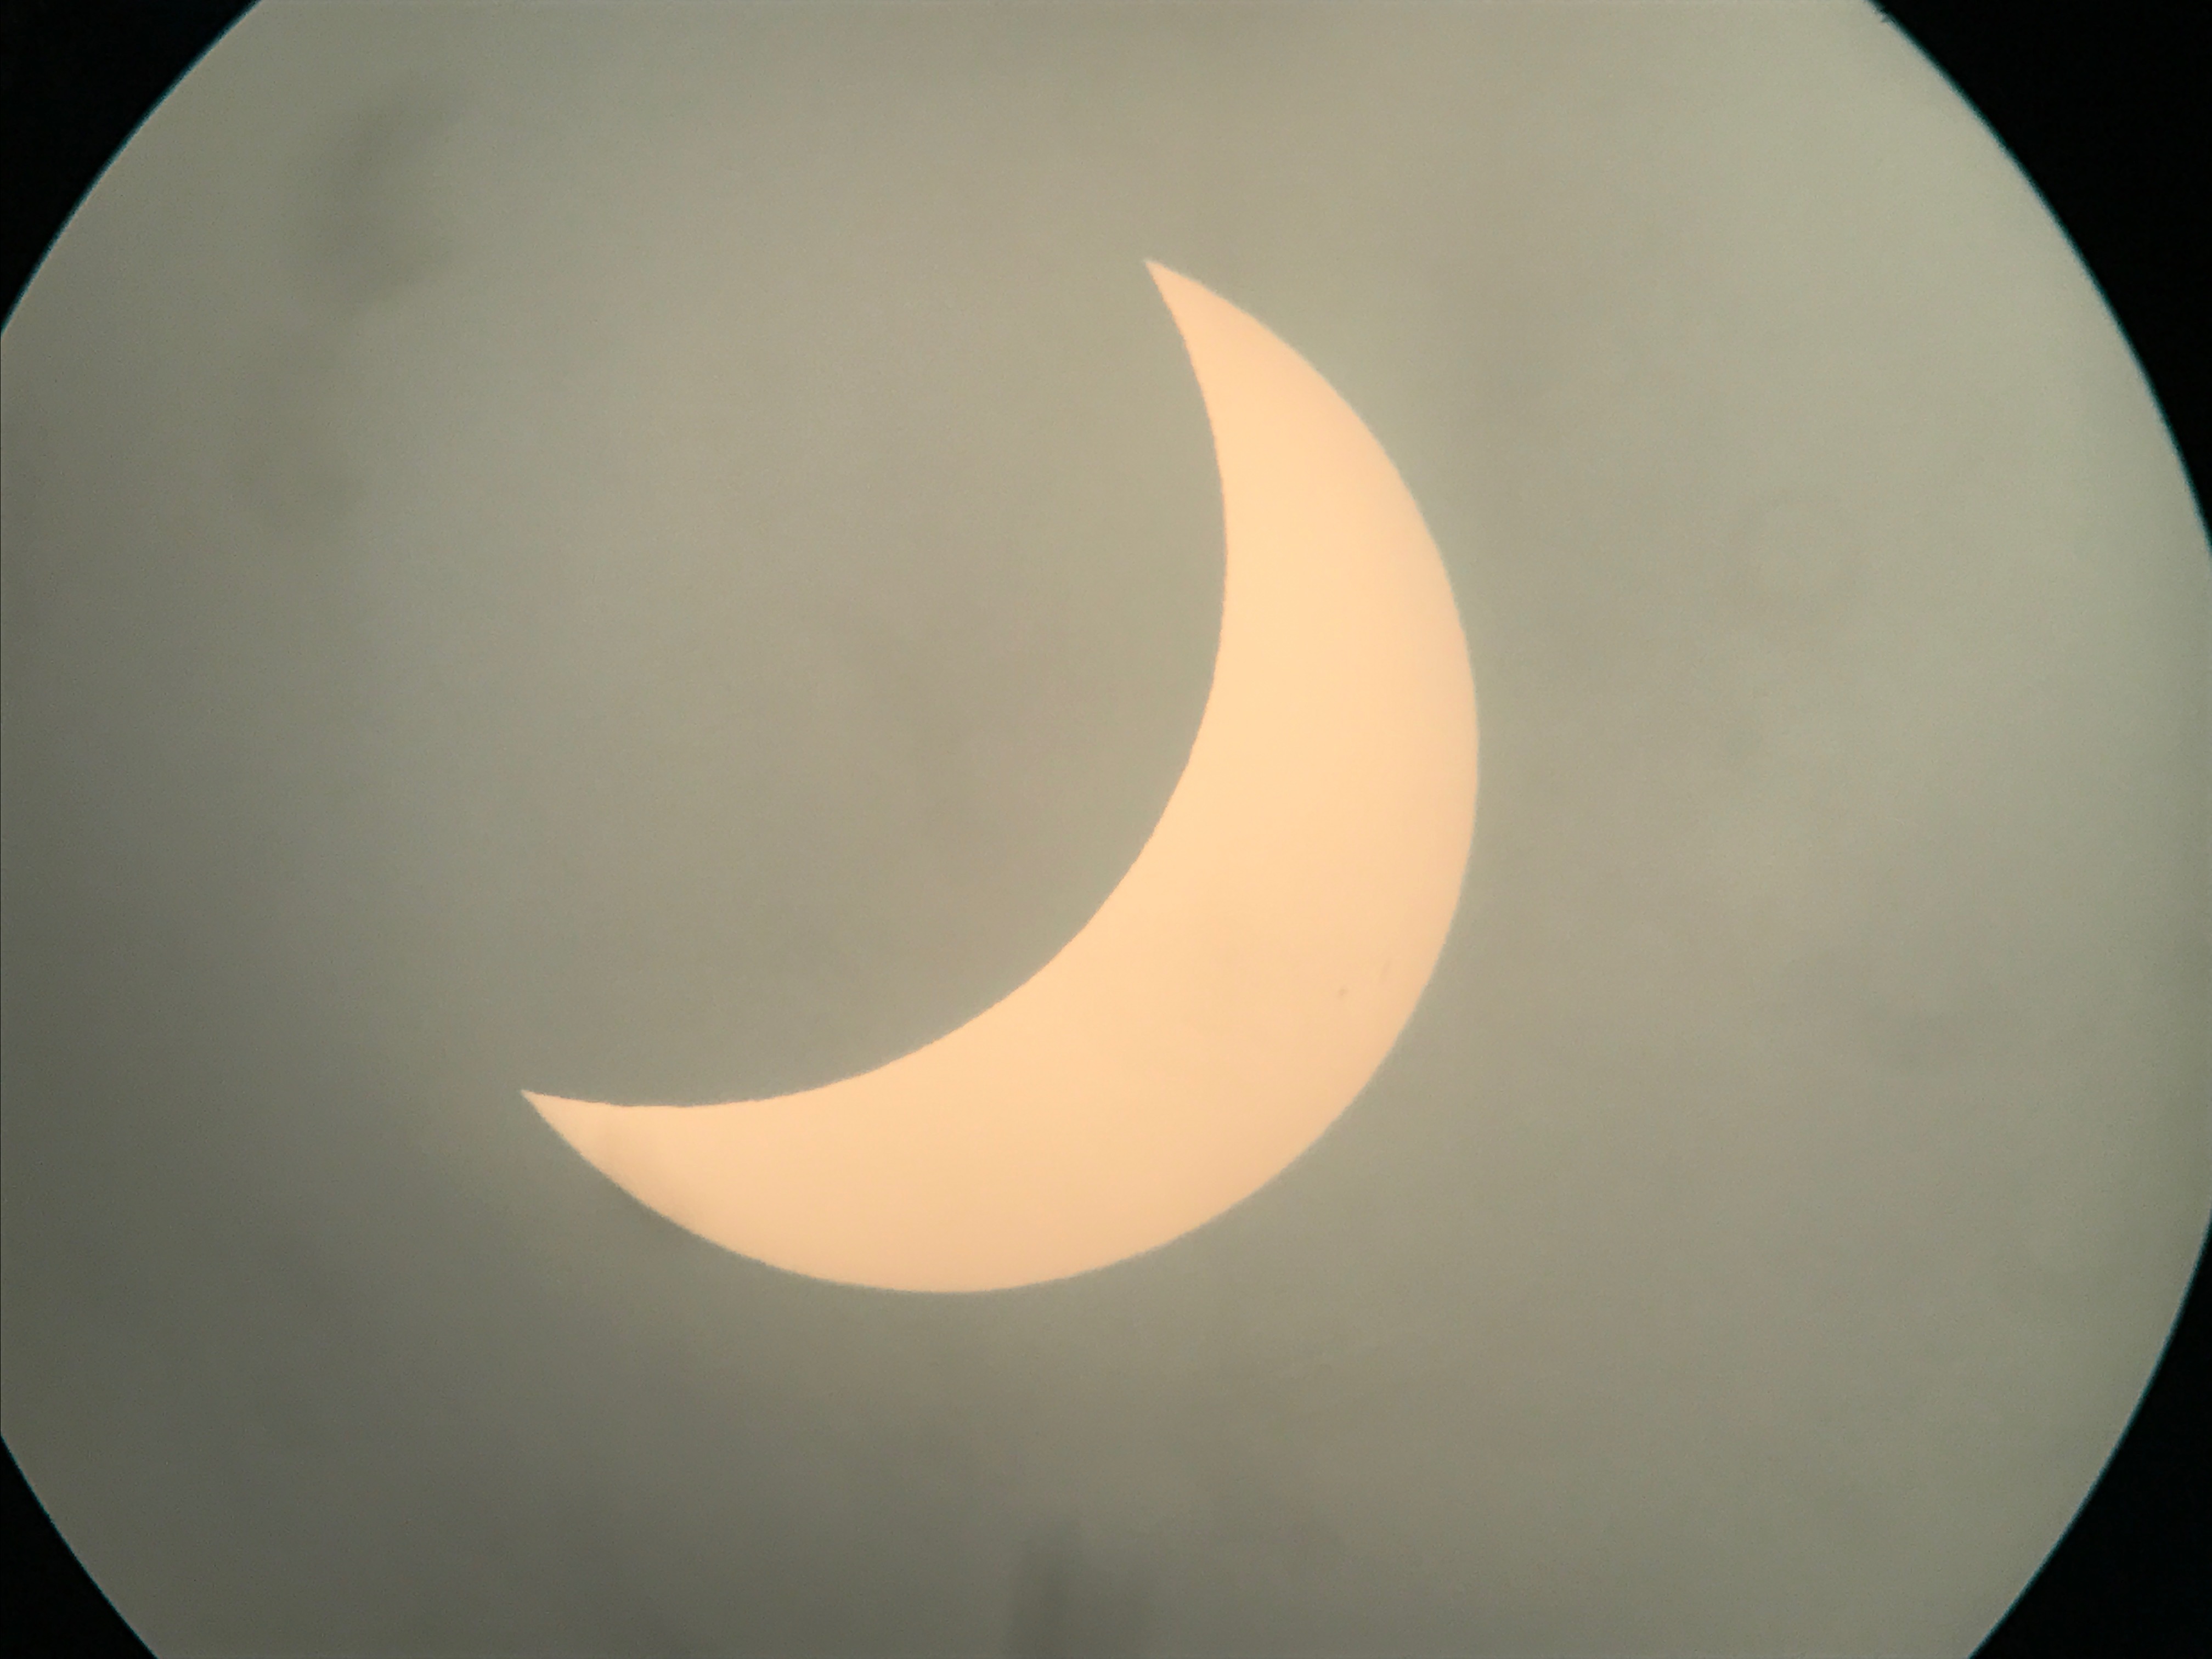 The sun is a crescent